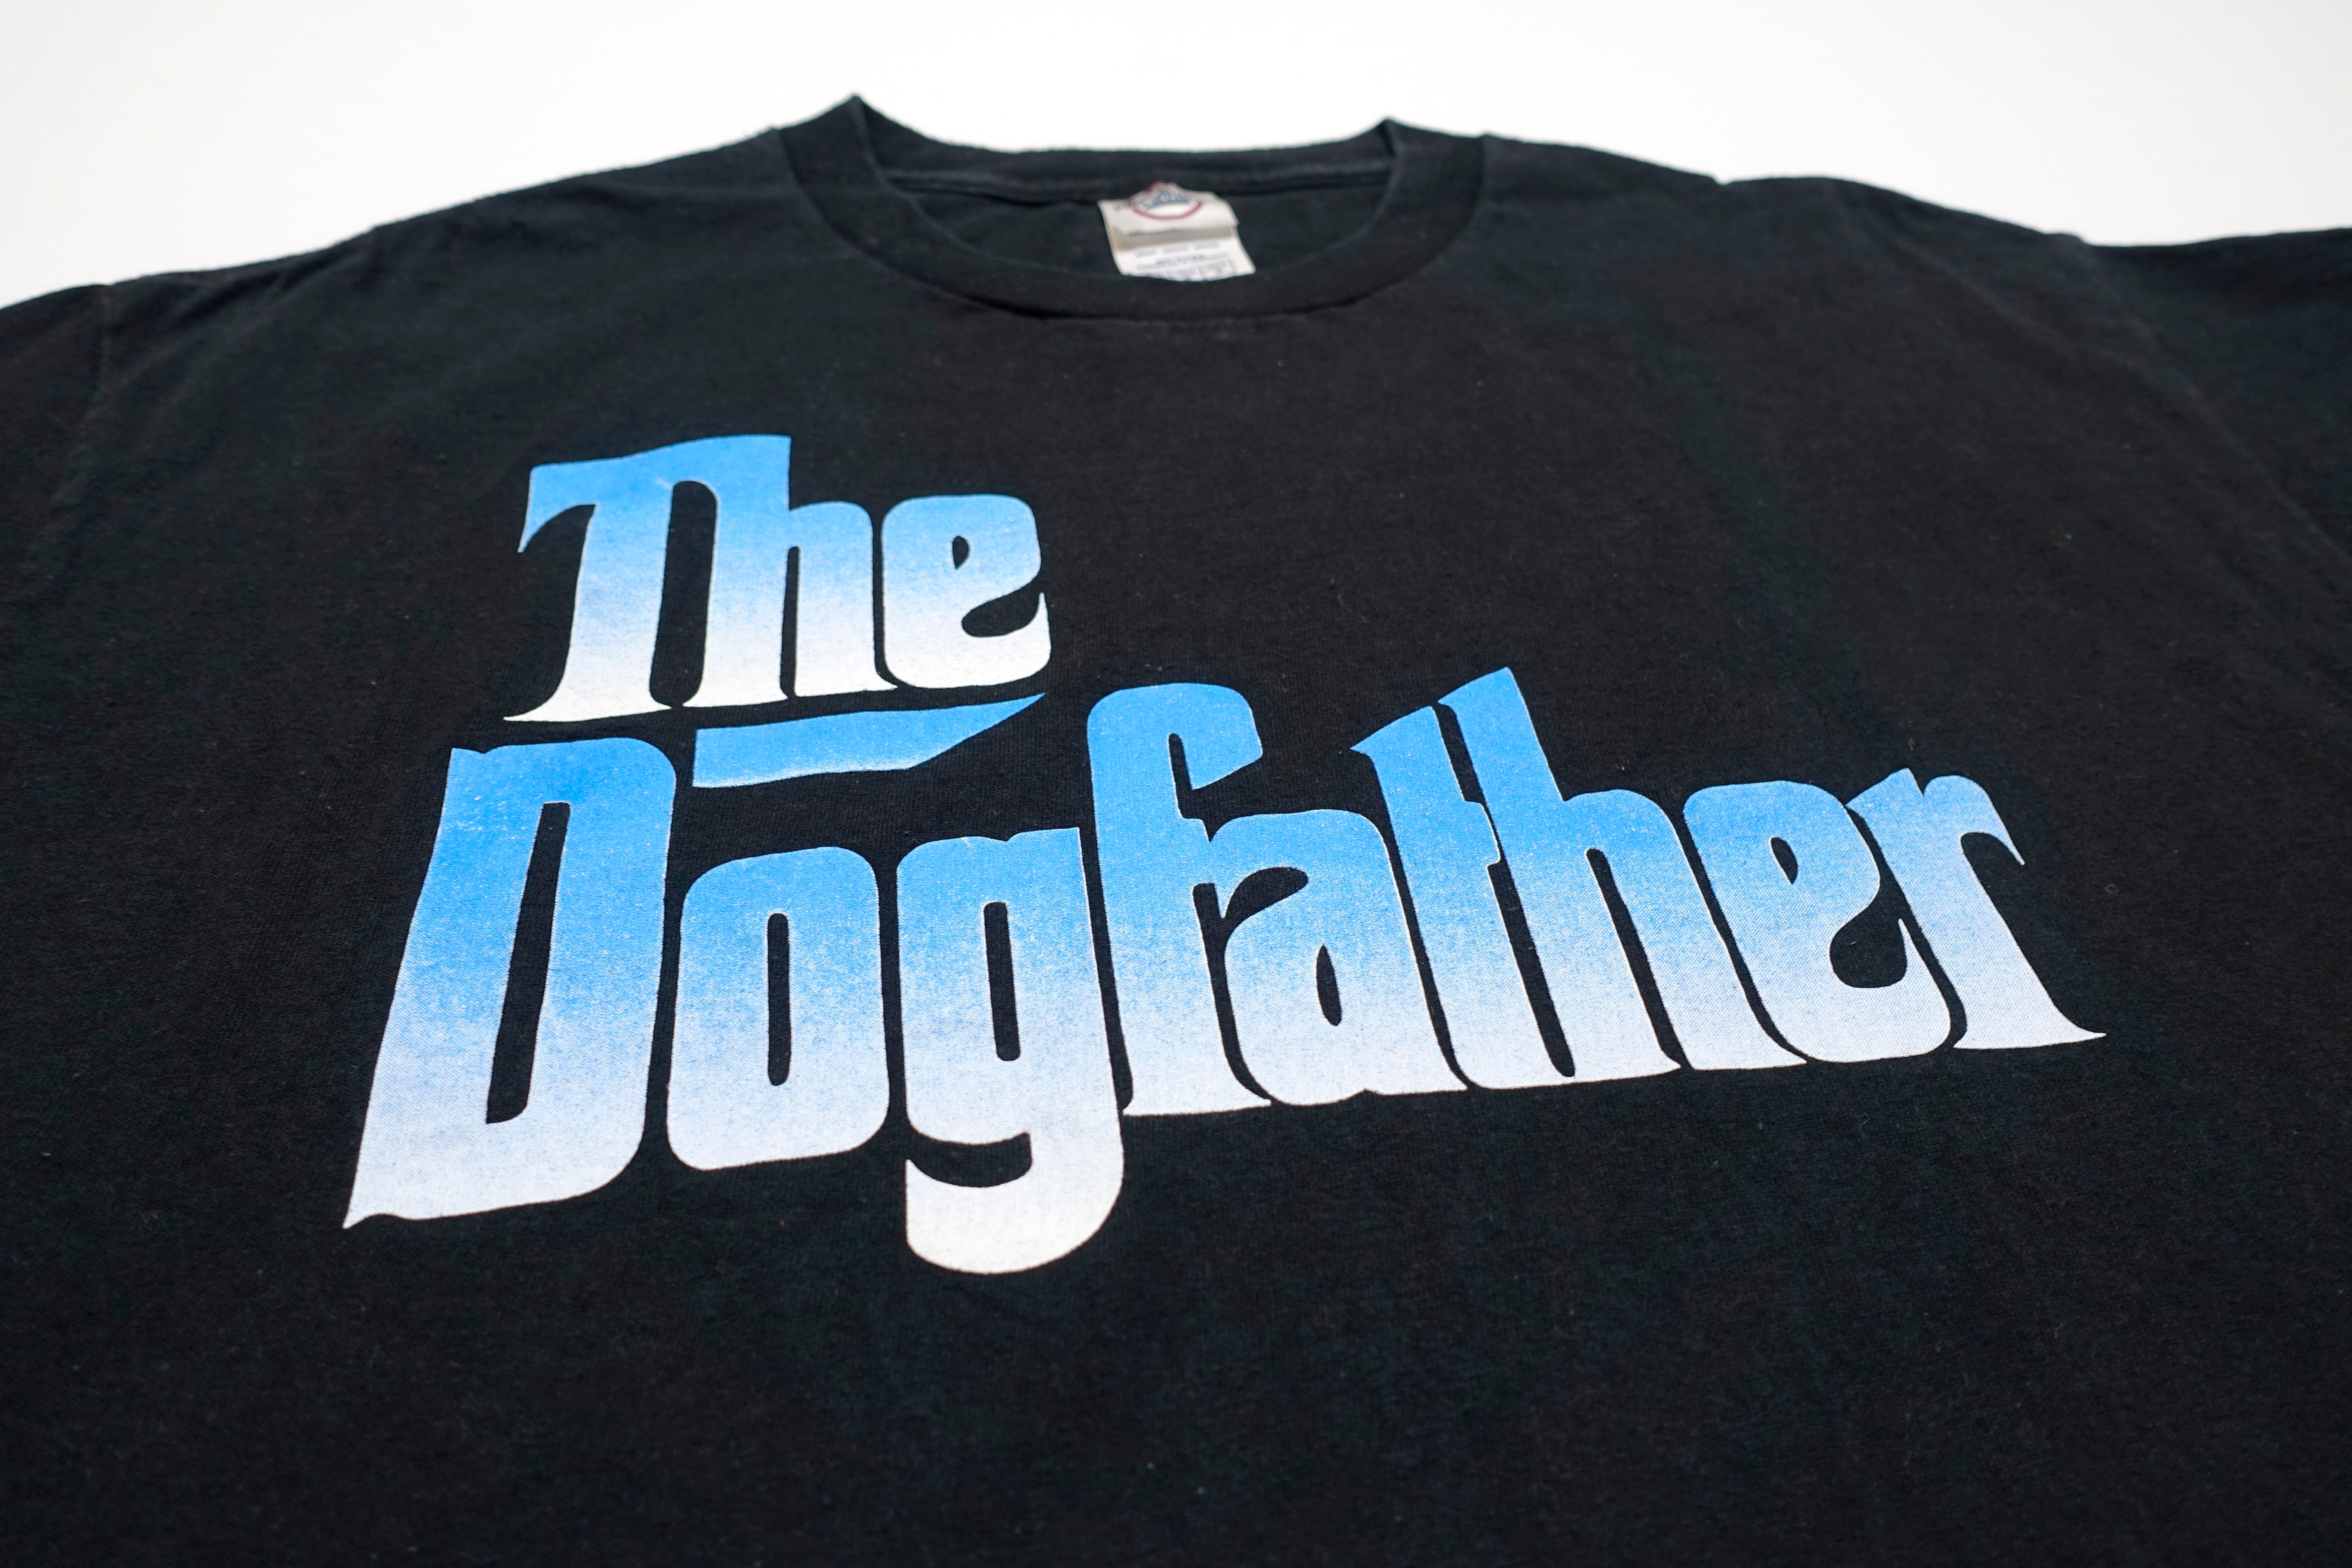 Snoop Dogg - the Dogfather 1996 Shirt Size Large